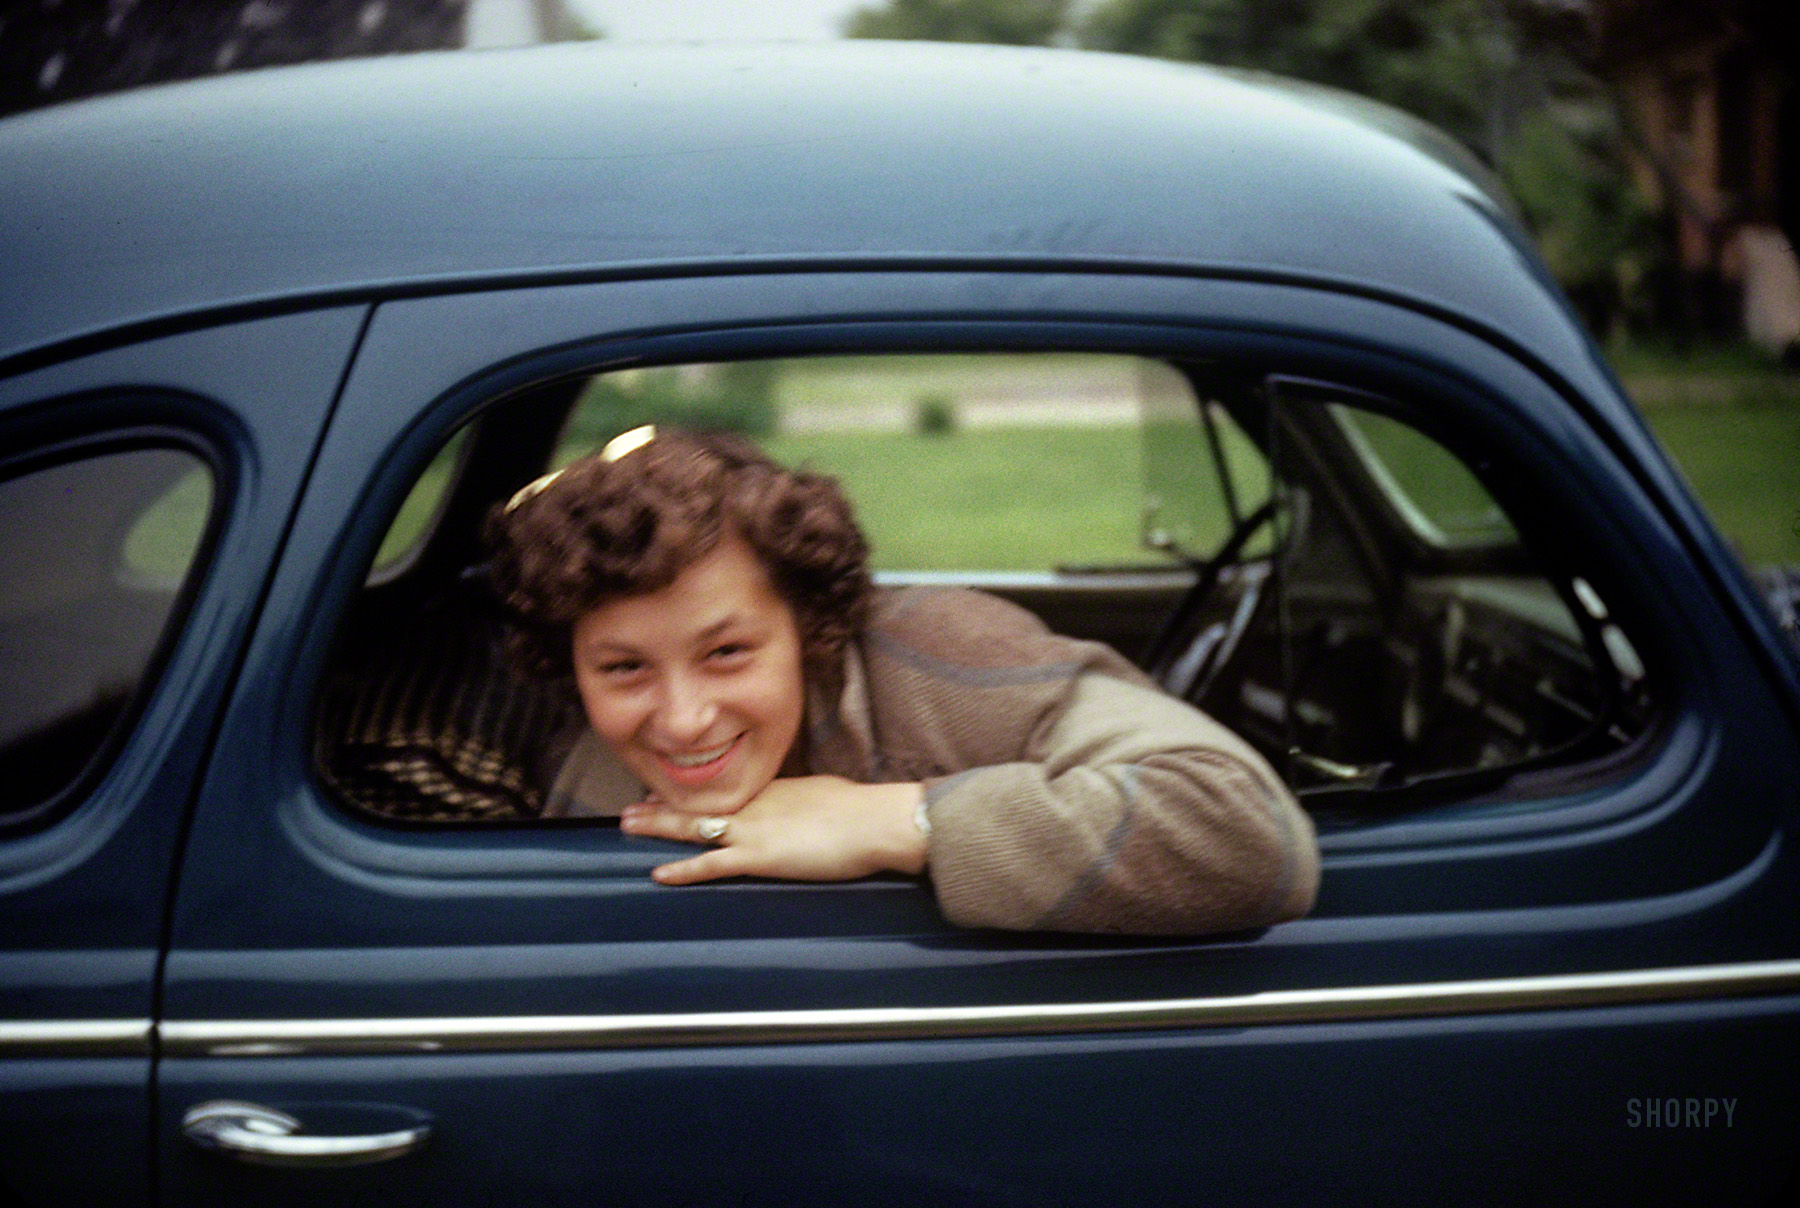 "1943" is all it says on the slide mount of this Kodachrome. But this young lady looks vaguely familiar. Have we seen her before? View full size.